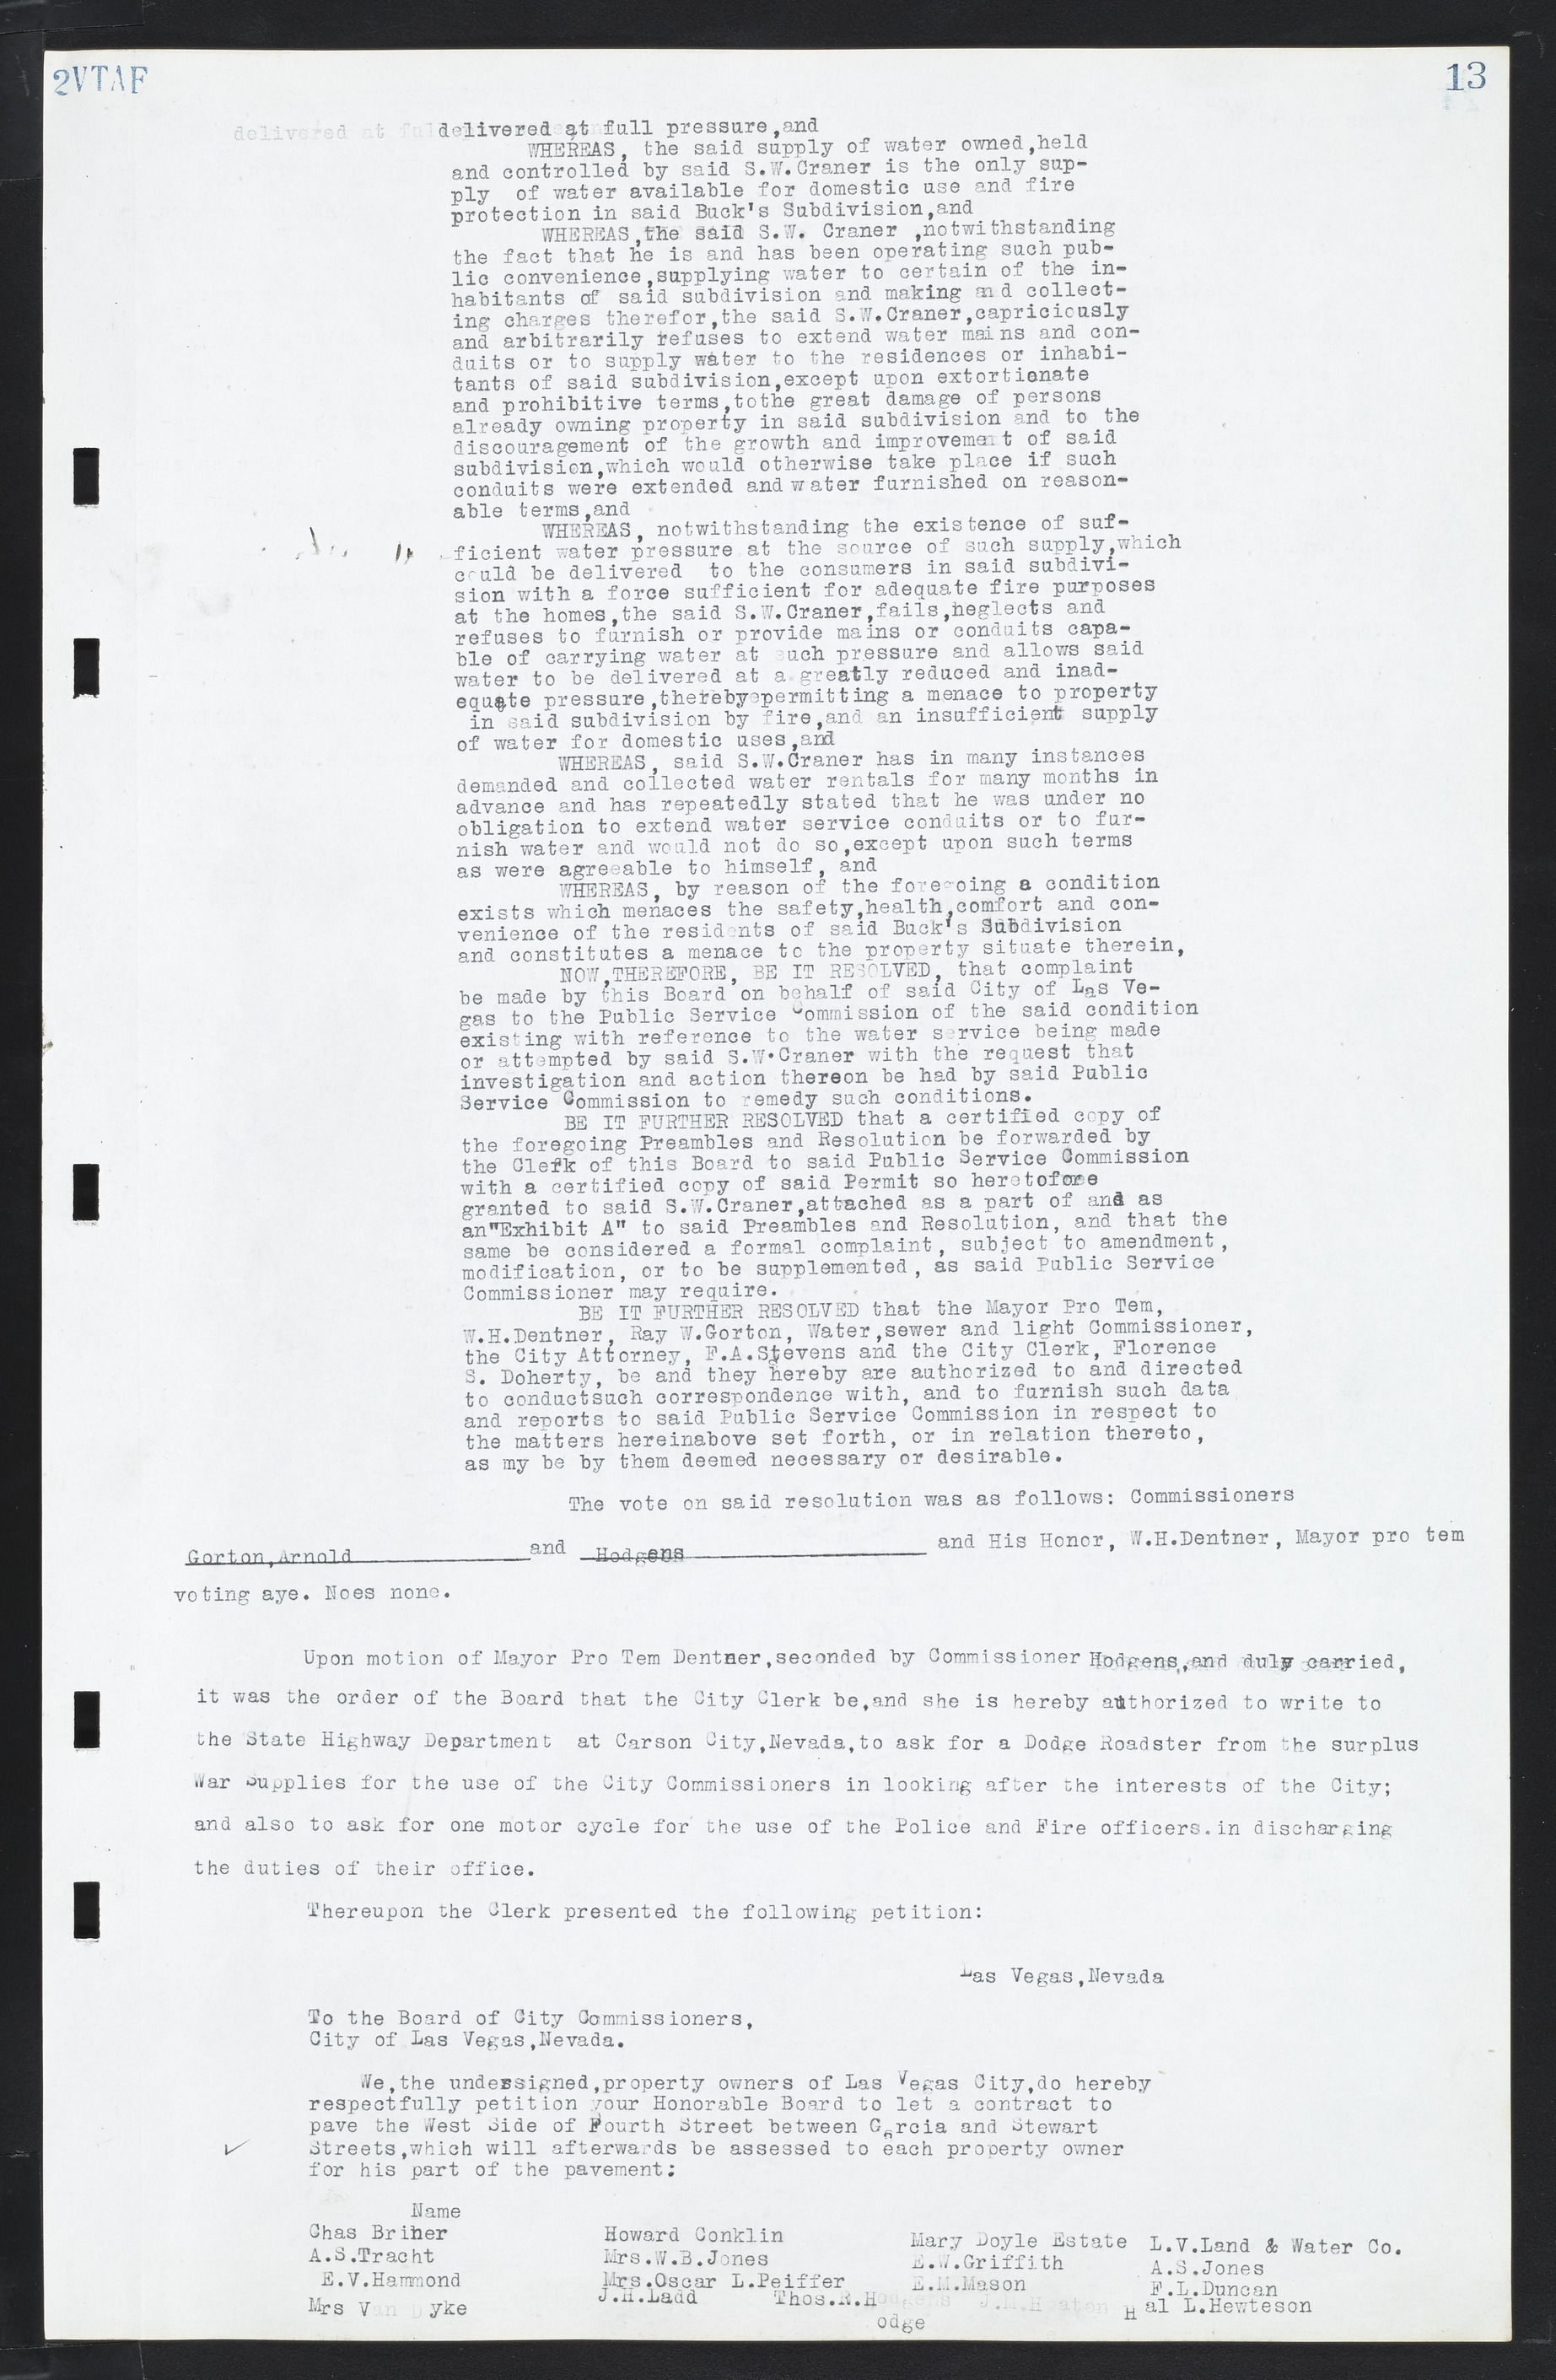 Las Vegas City Commission Minutes, March 1, 1922 to May 10, 1929, lvc000002-20